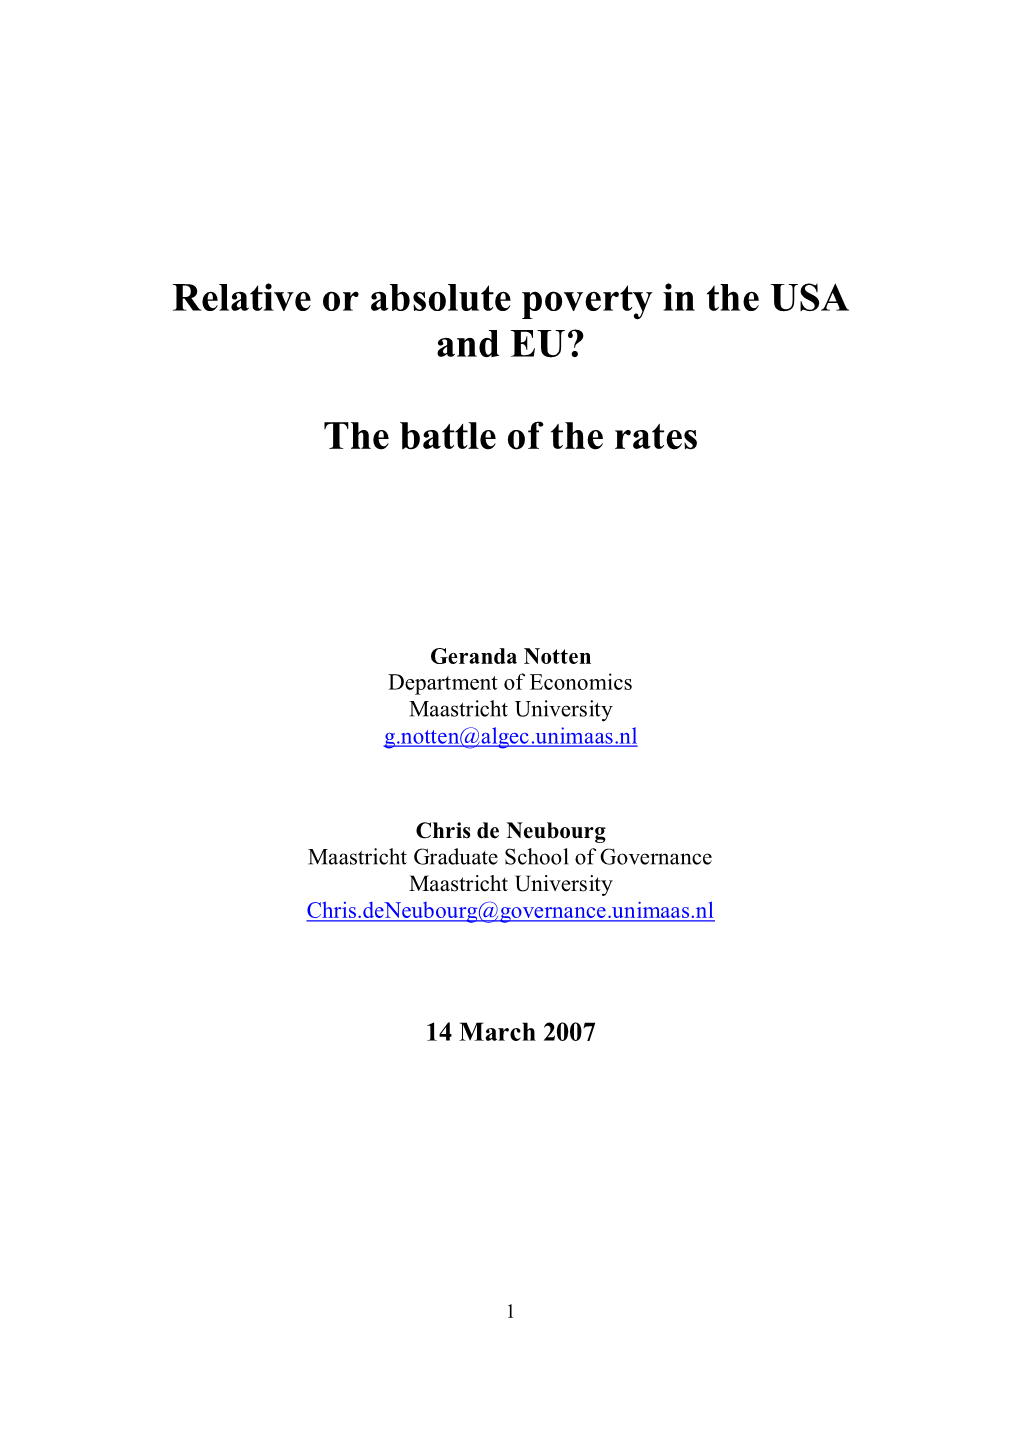 Relative Or Absolute Poverty in the USA and EU? the Battle of the Rates